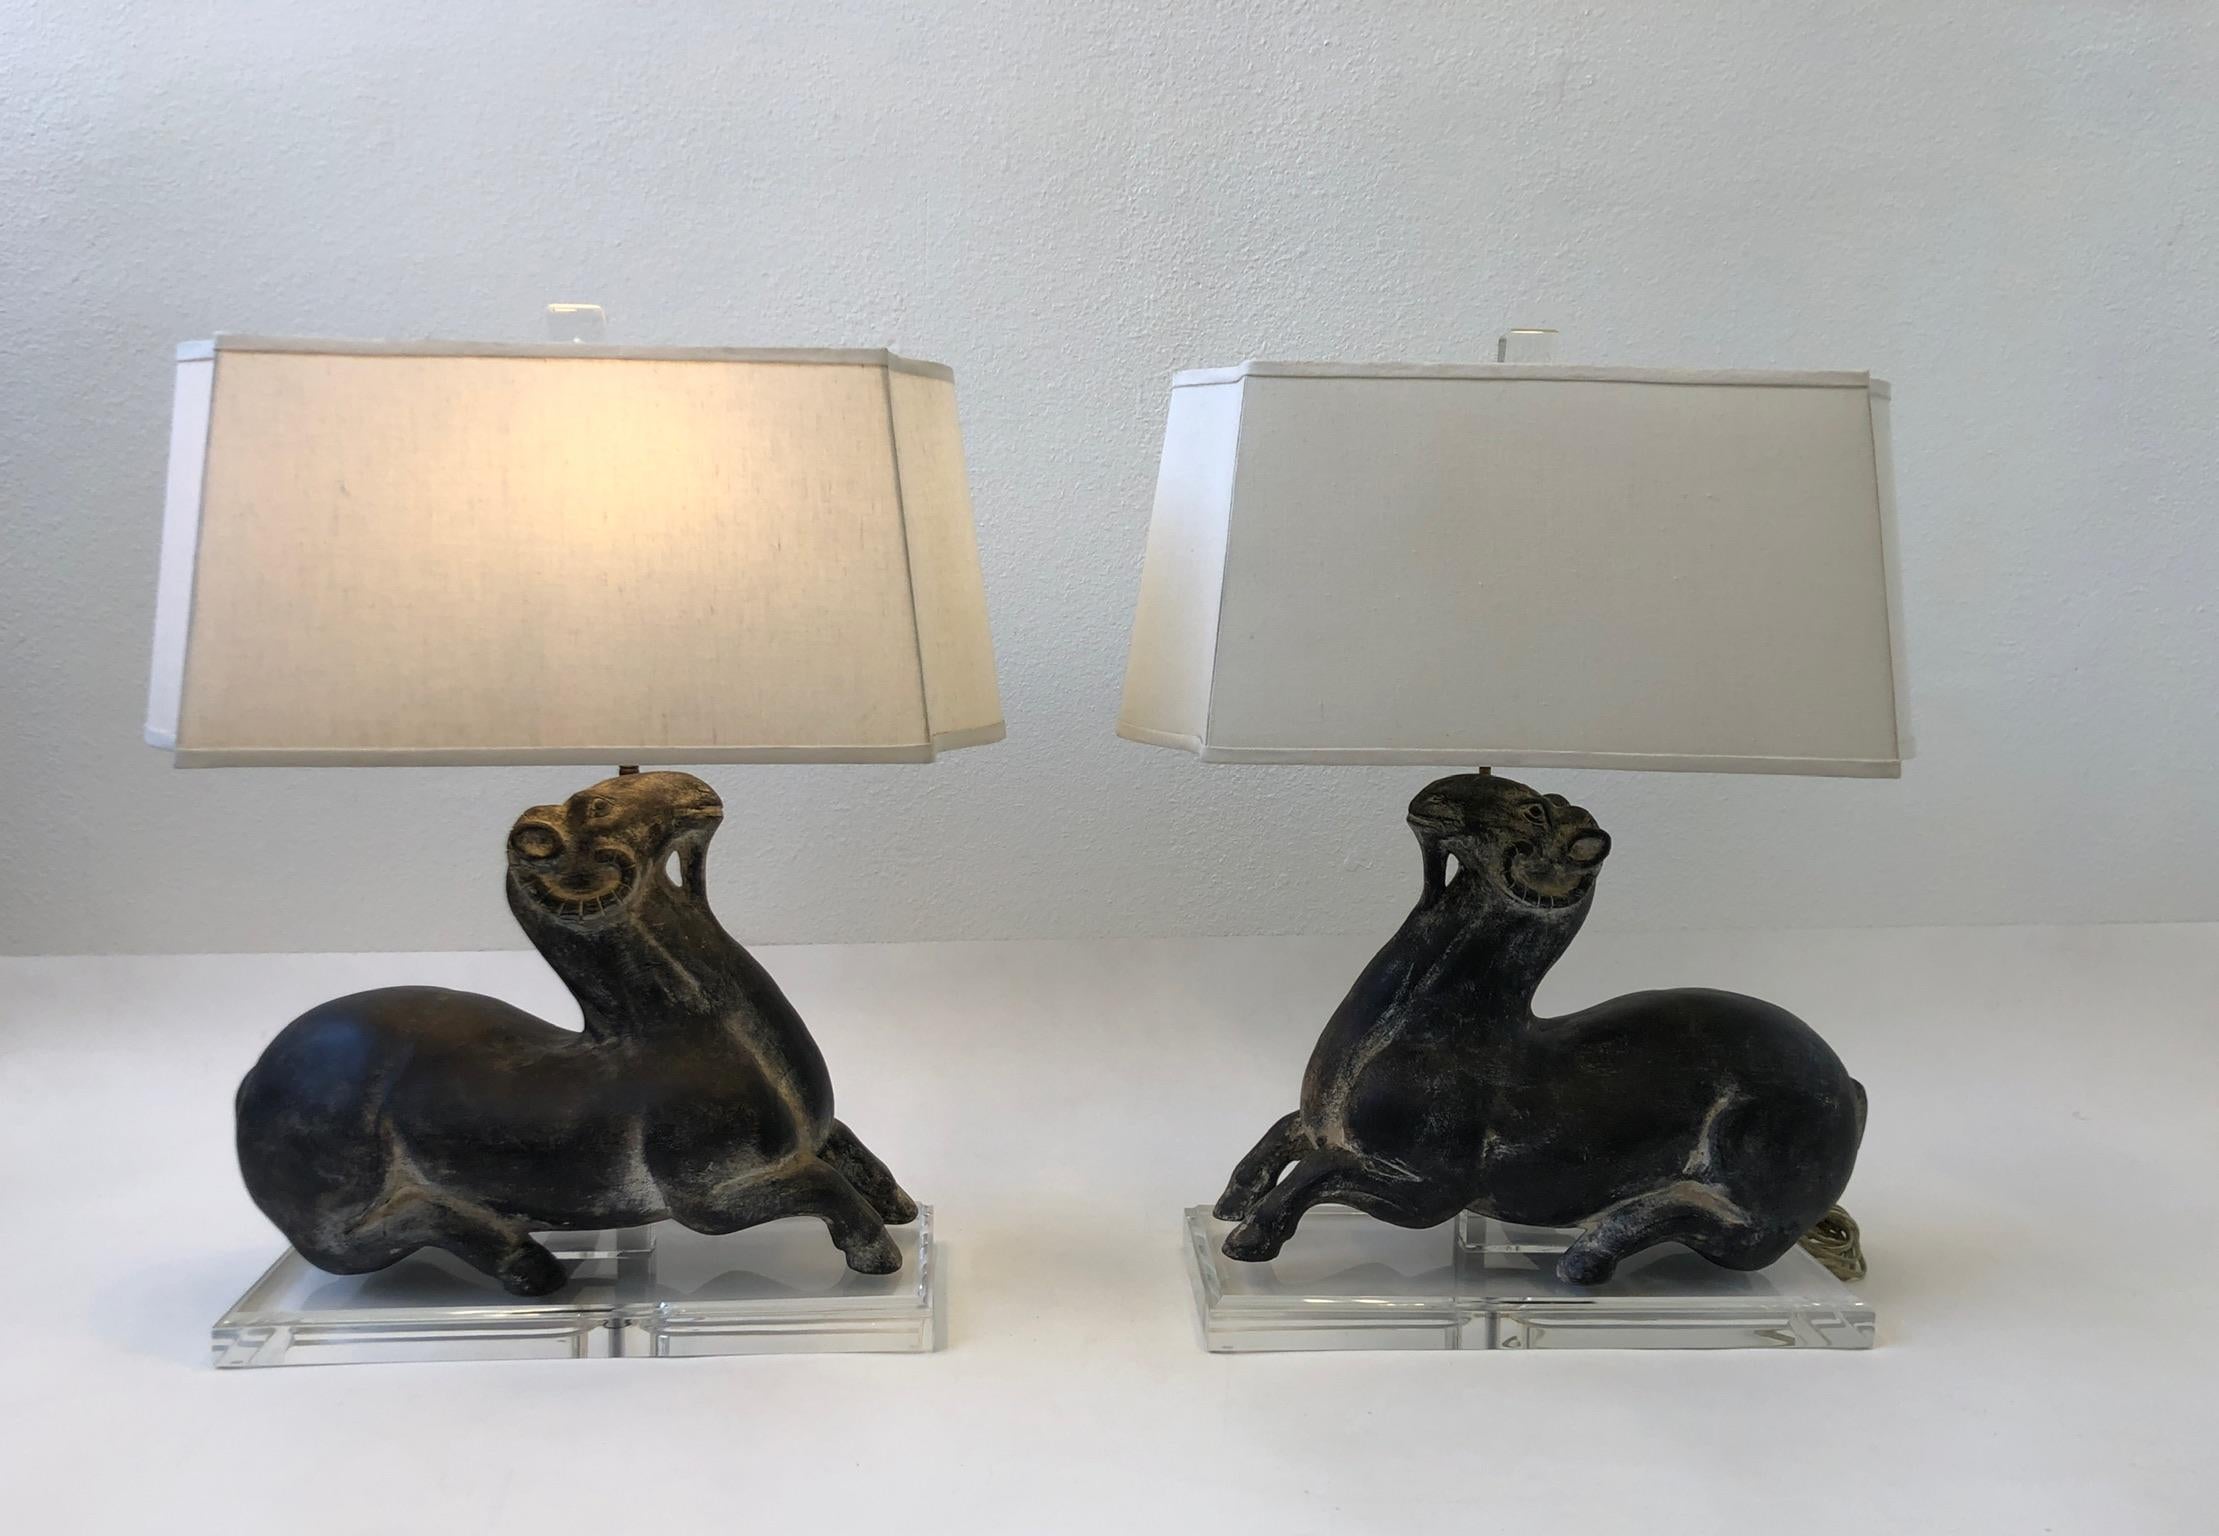 Polished Pair of Ceramic Goats and Lucite Table Lamps by Steve Chase For Sale